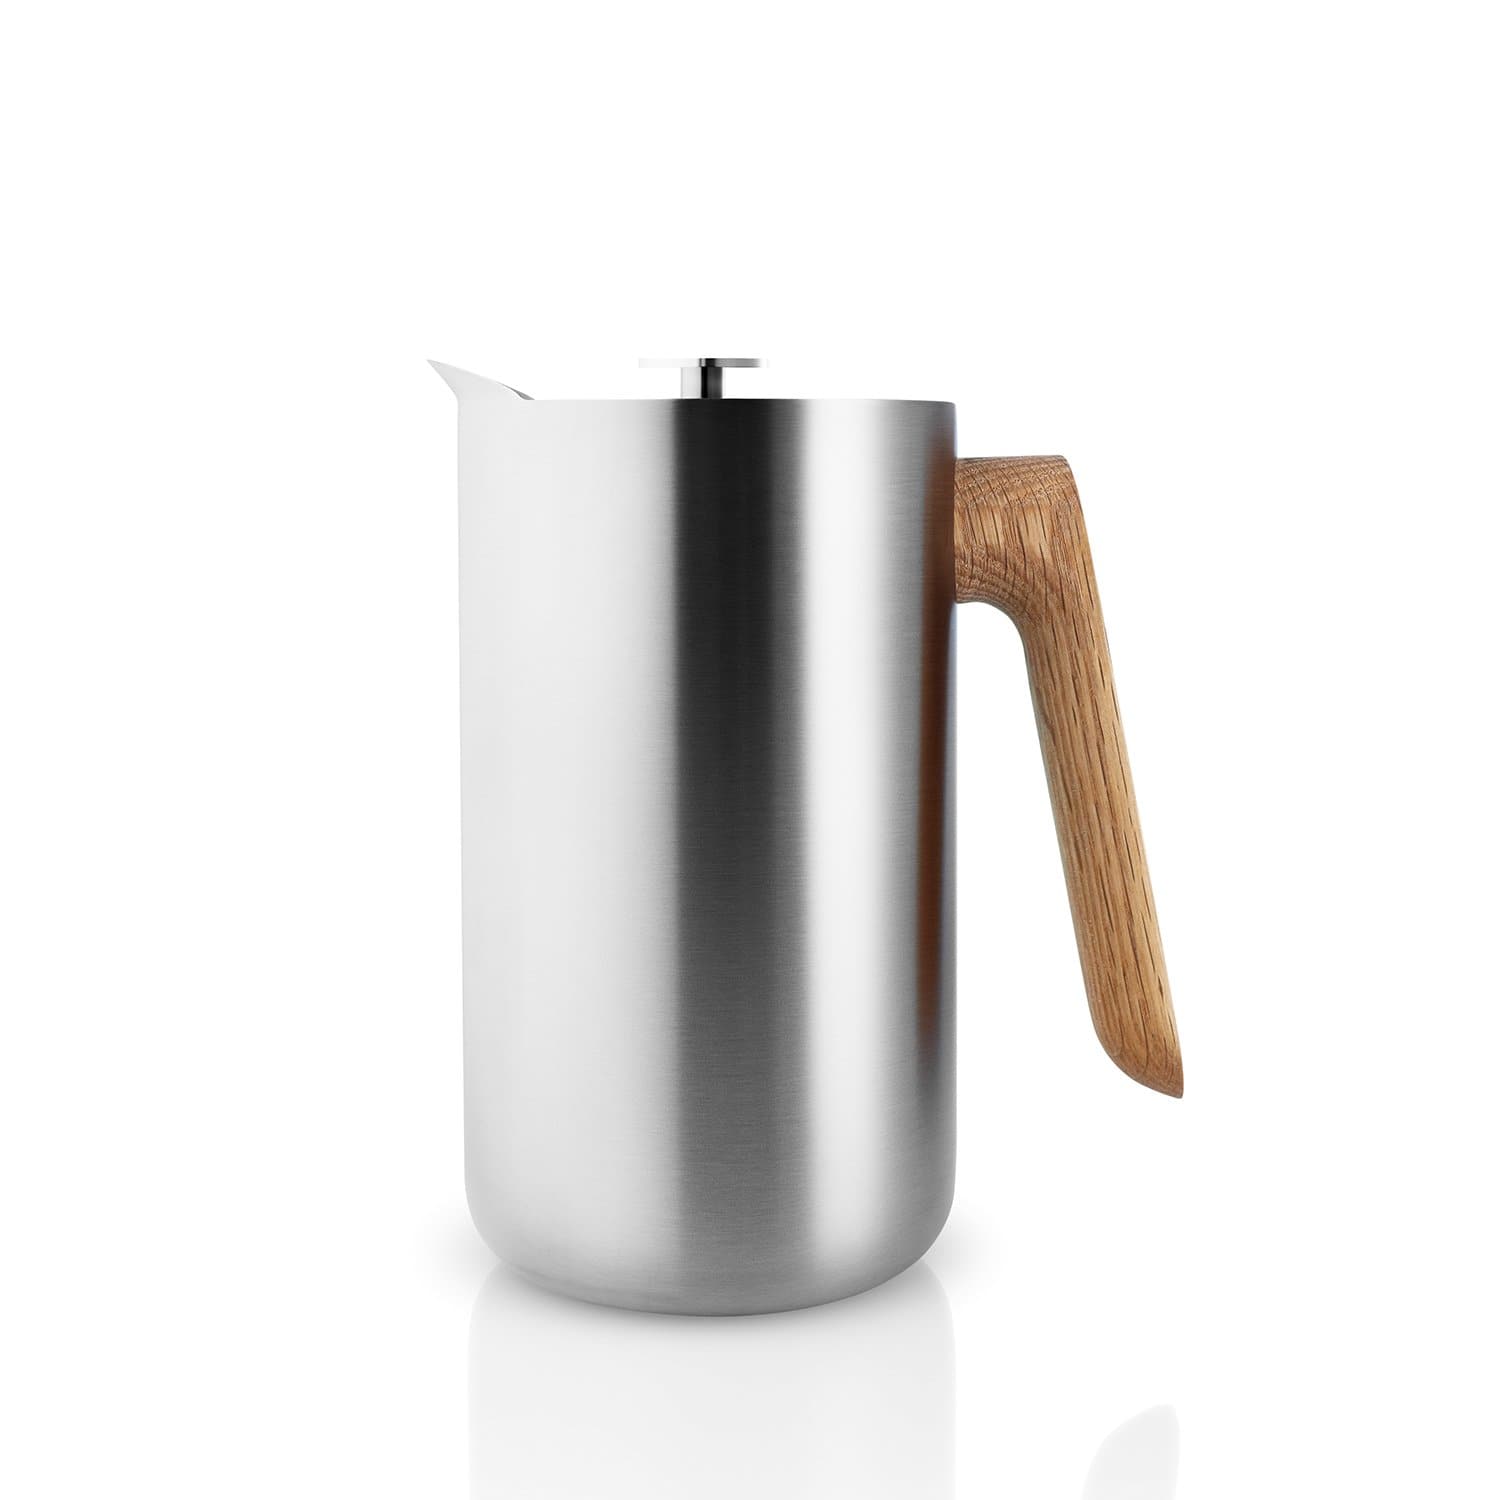 EVA SOLO THERMO CAFETIRE NORDIC KITCHEN STAINLESS STEEL-502754